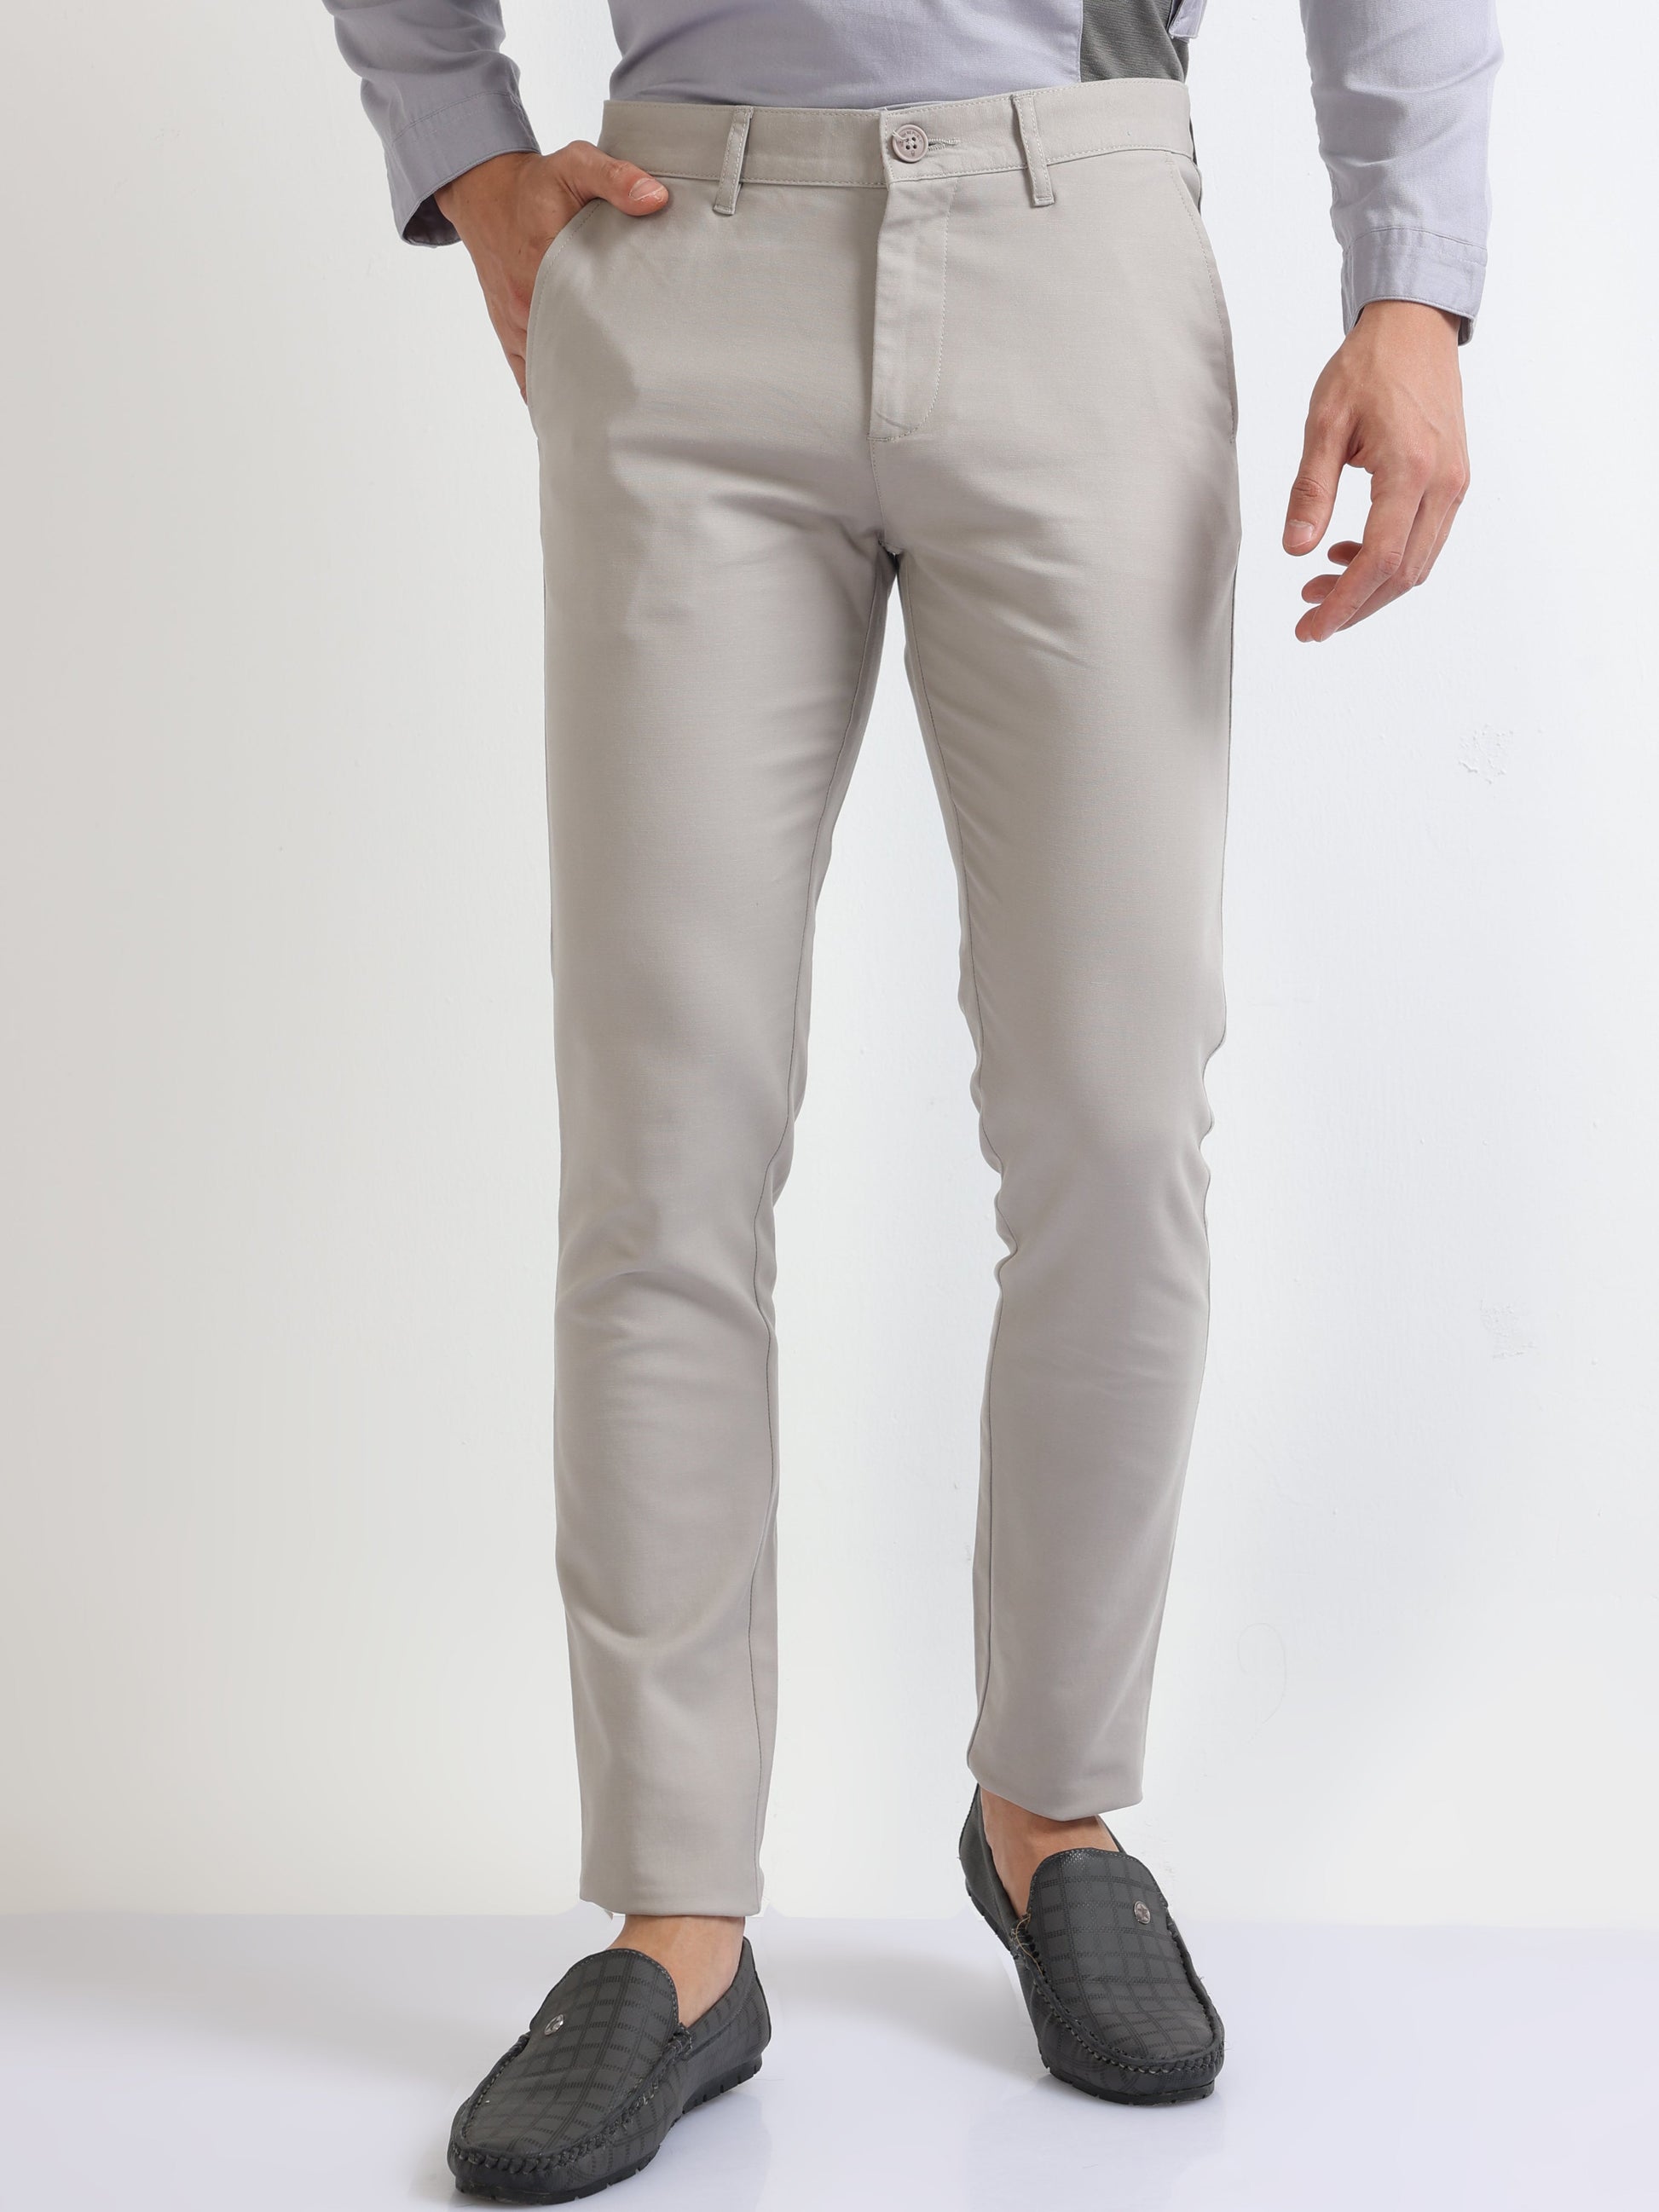 Buy Beige Cotton Stretch Men's Tapered Fit Trousers-North Republic